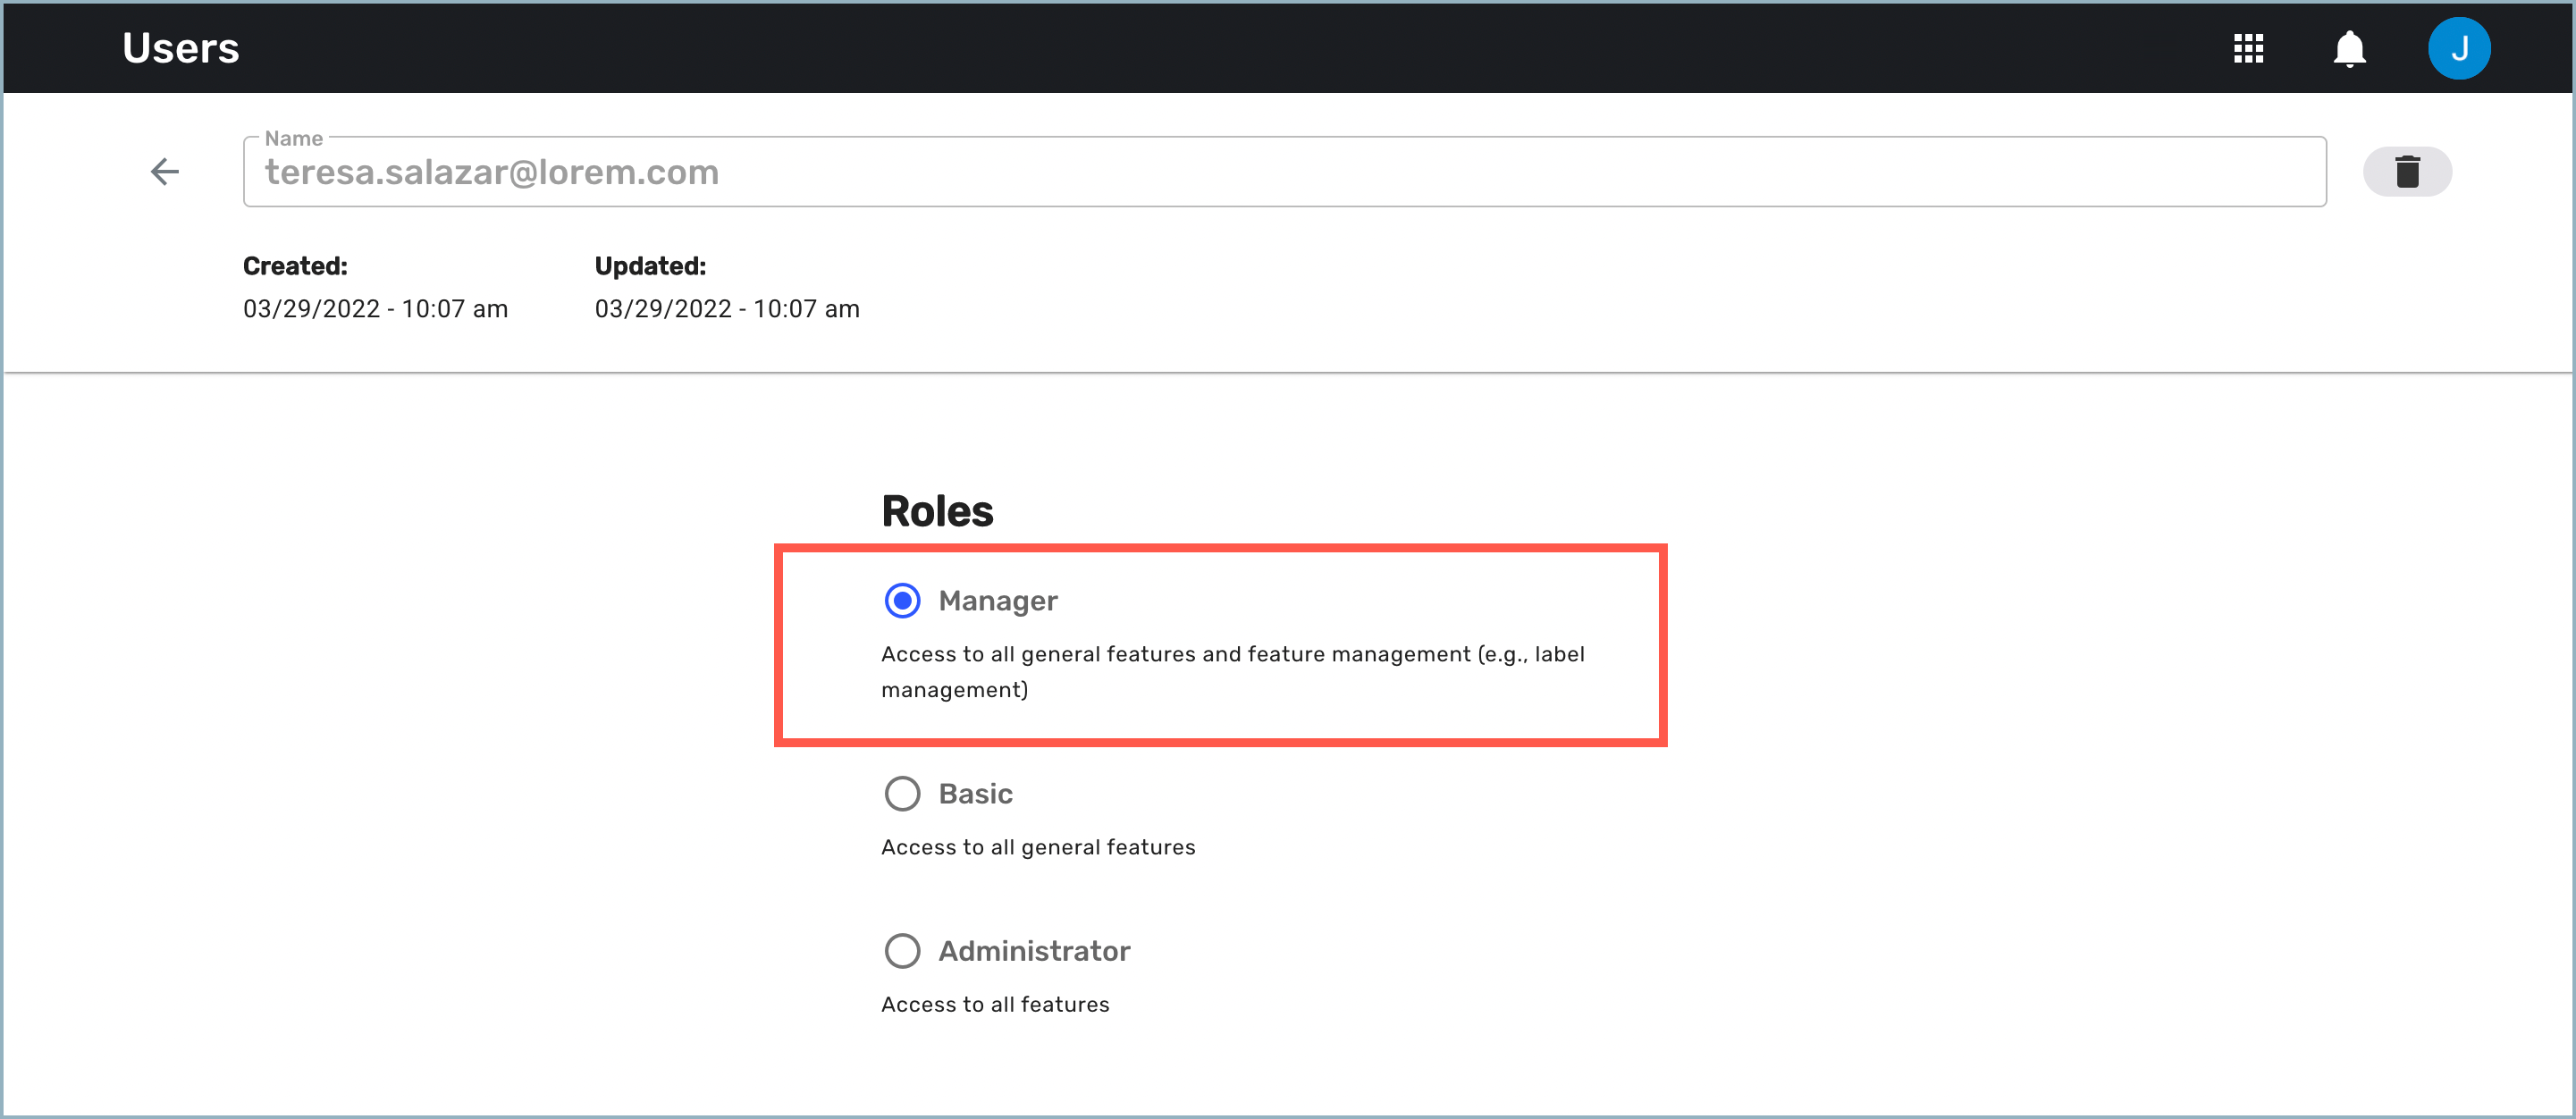 Users detail window - new user assigned manager role